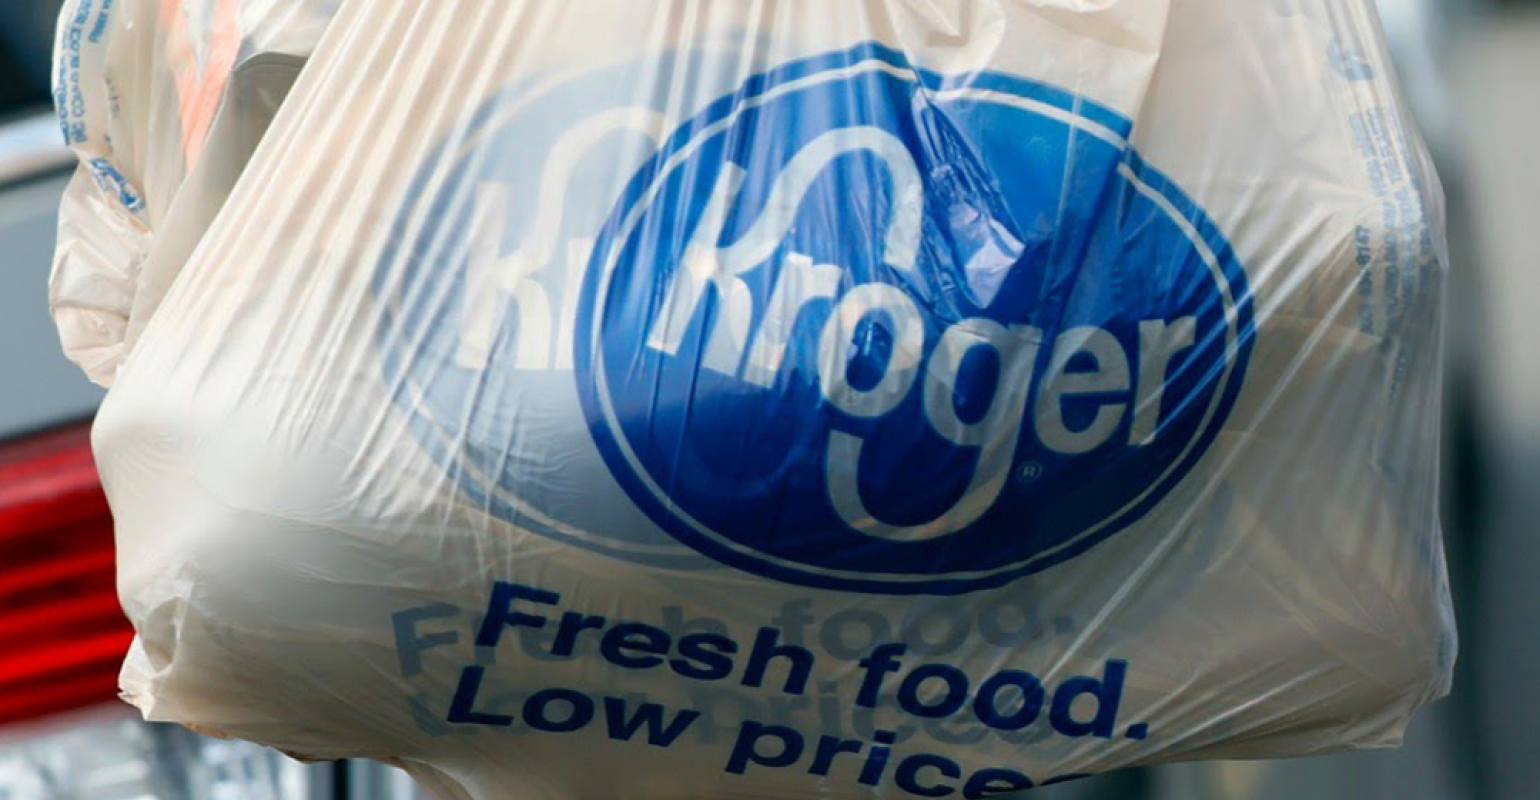 Kroger to ban plastic bags by 2025, will transition to reusable bags |  13newsnow.com